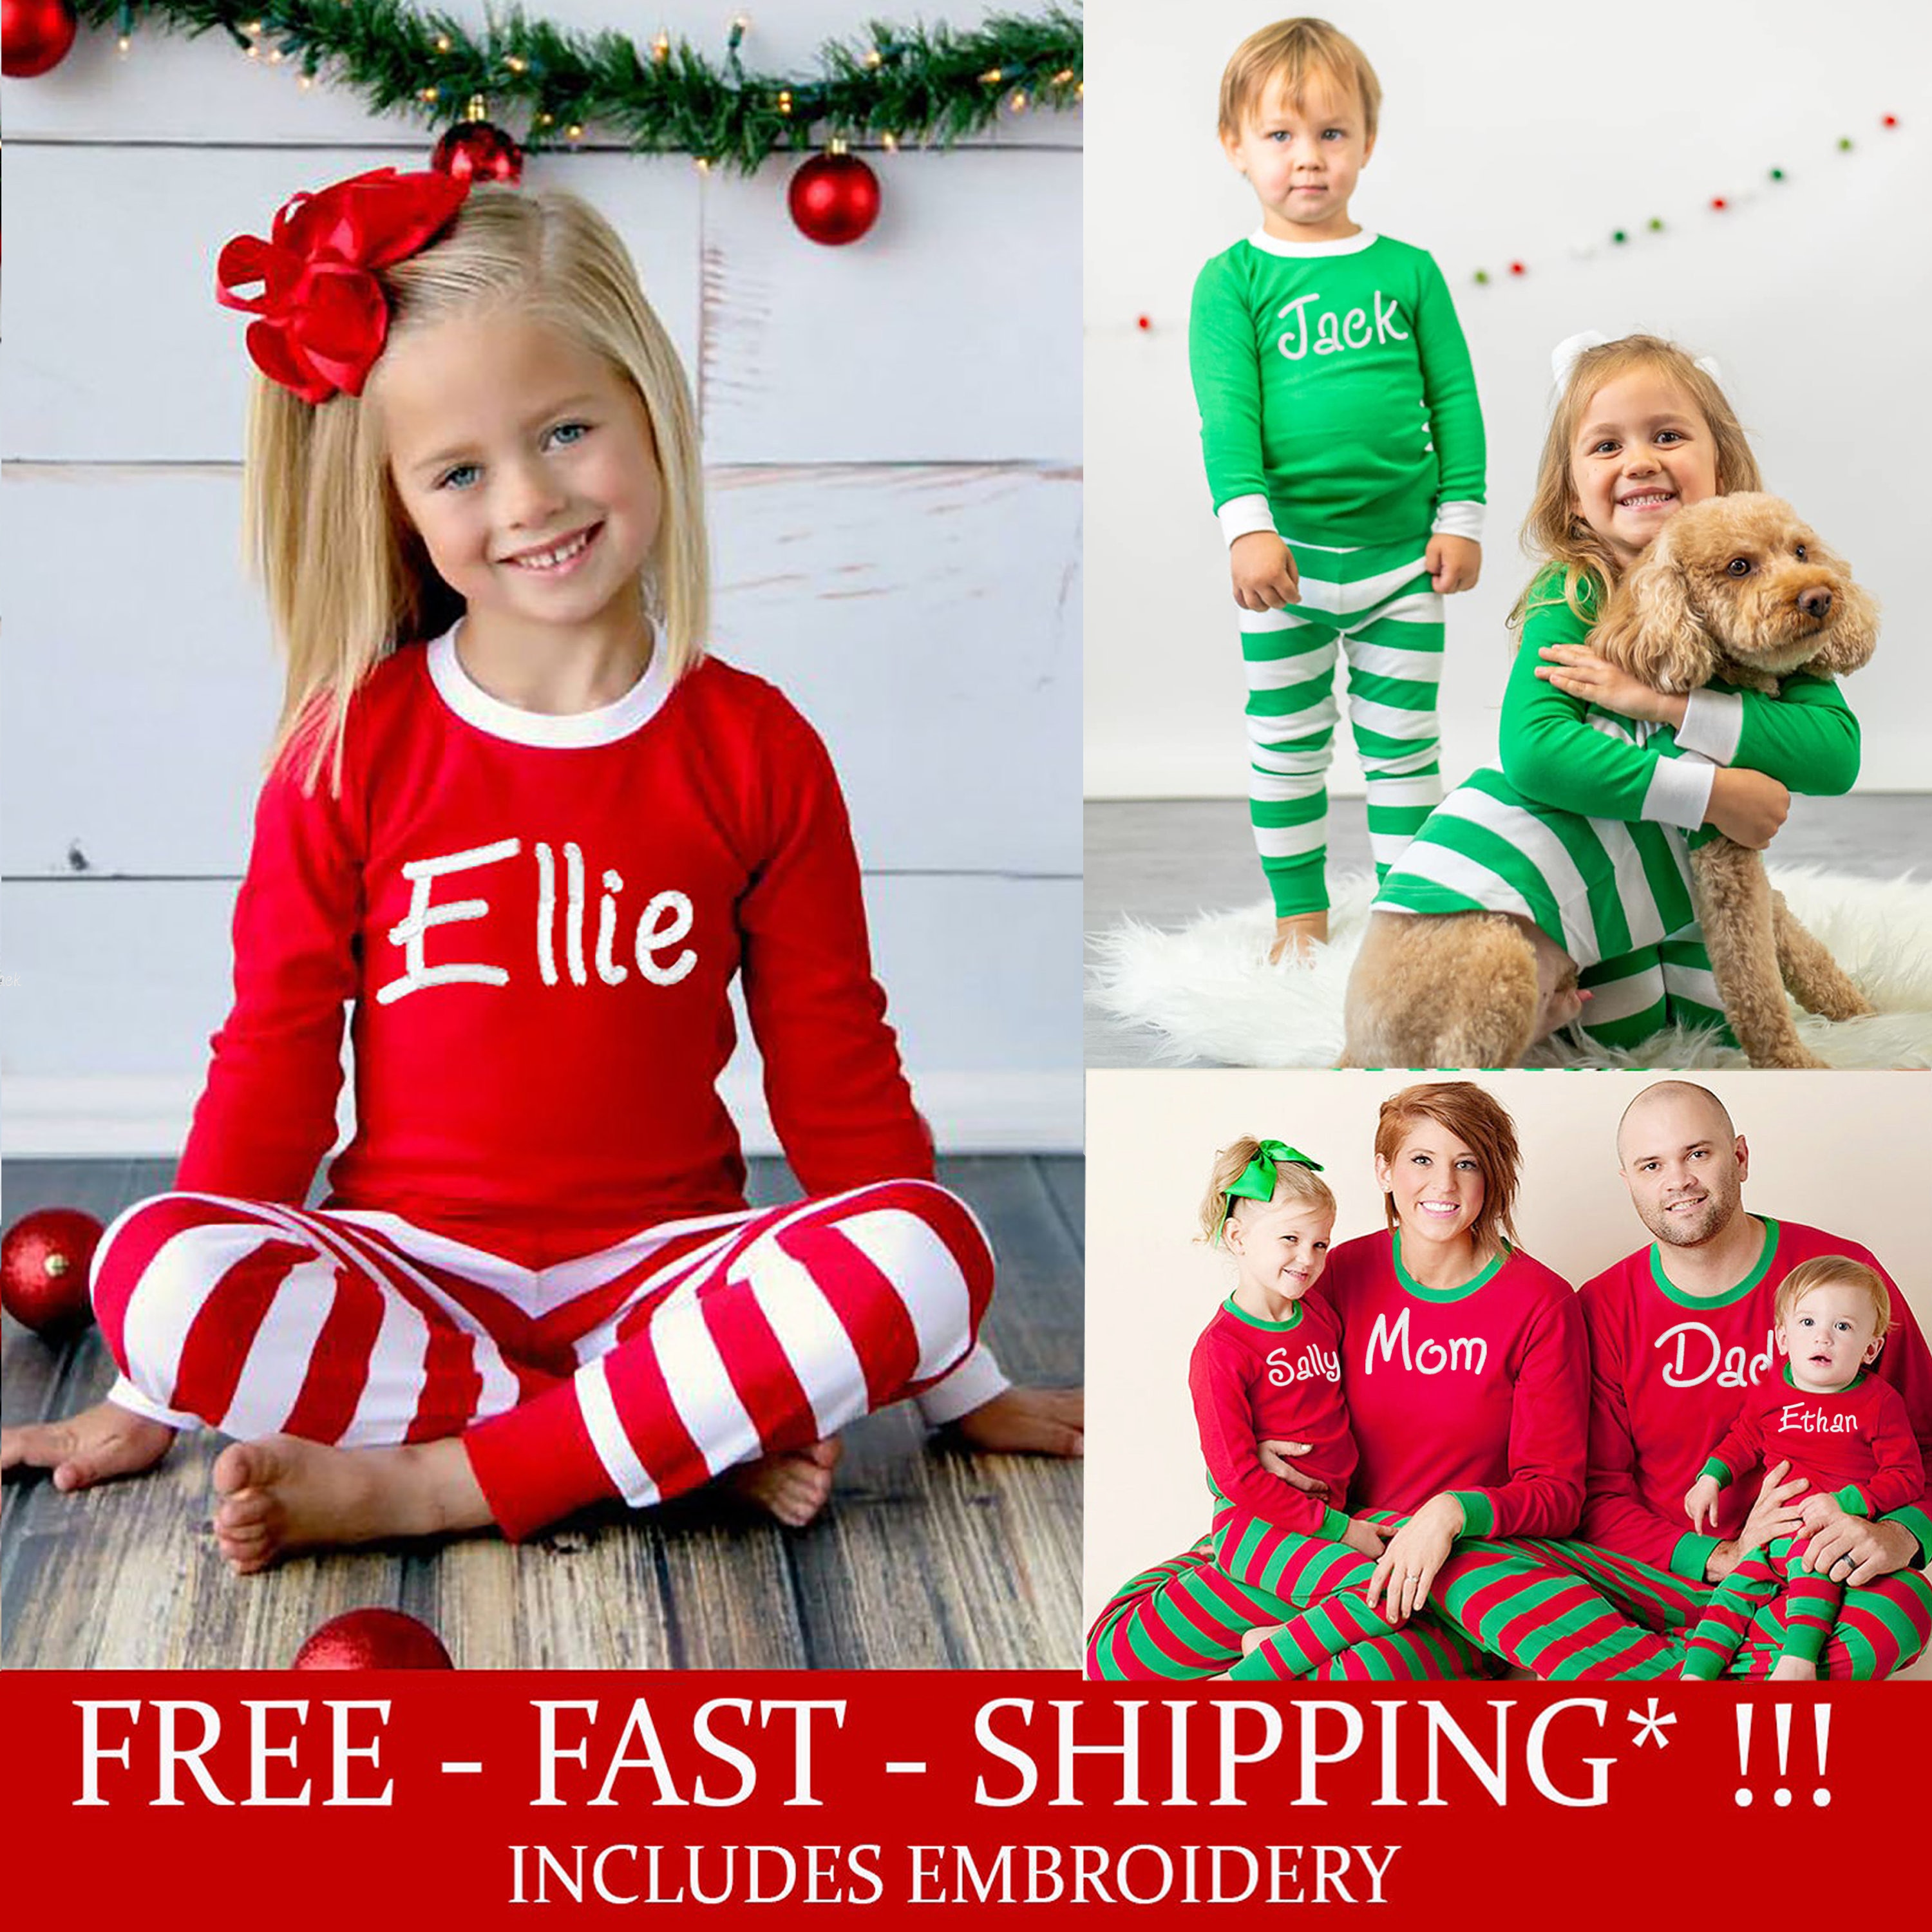 Dezsed Family Matching Outfits Women's Pajama Set Clearance Matching Family  Christmas Pajamas Set Christmas Pjs For Family Set Top And Long Pants